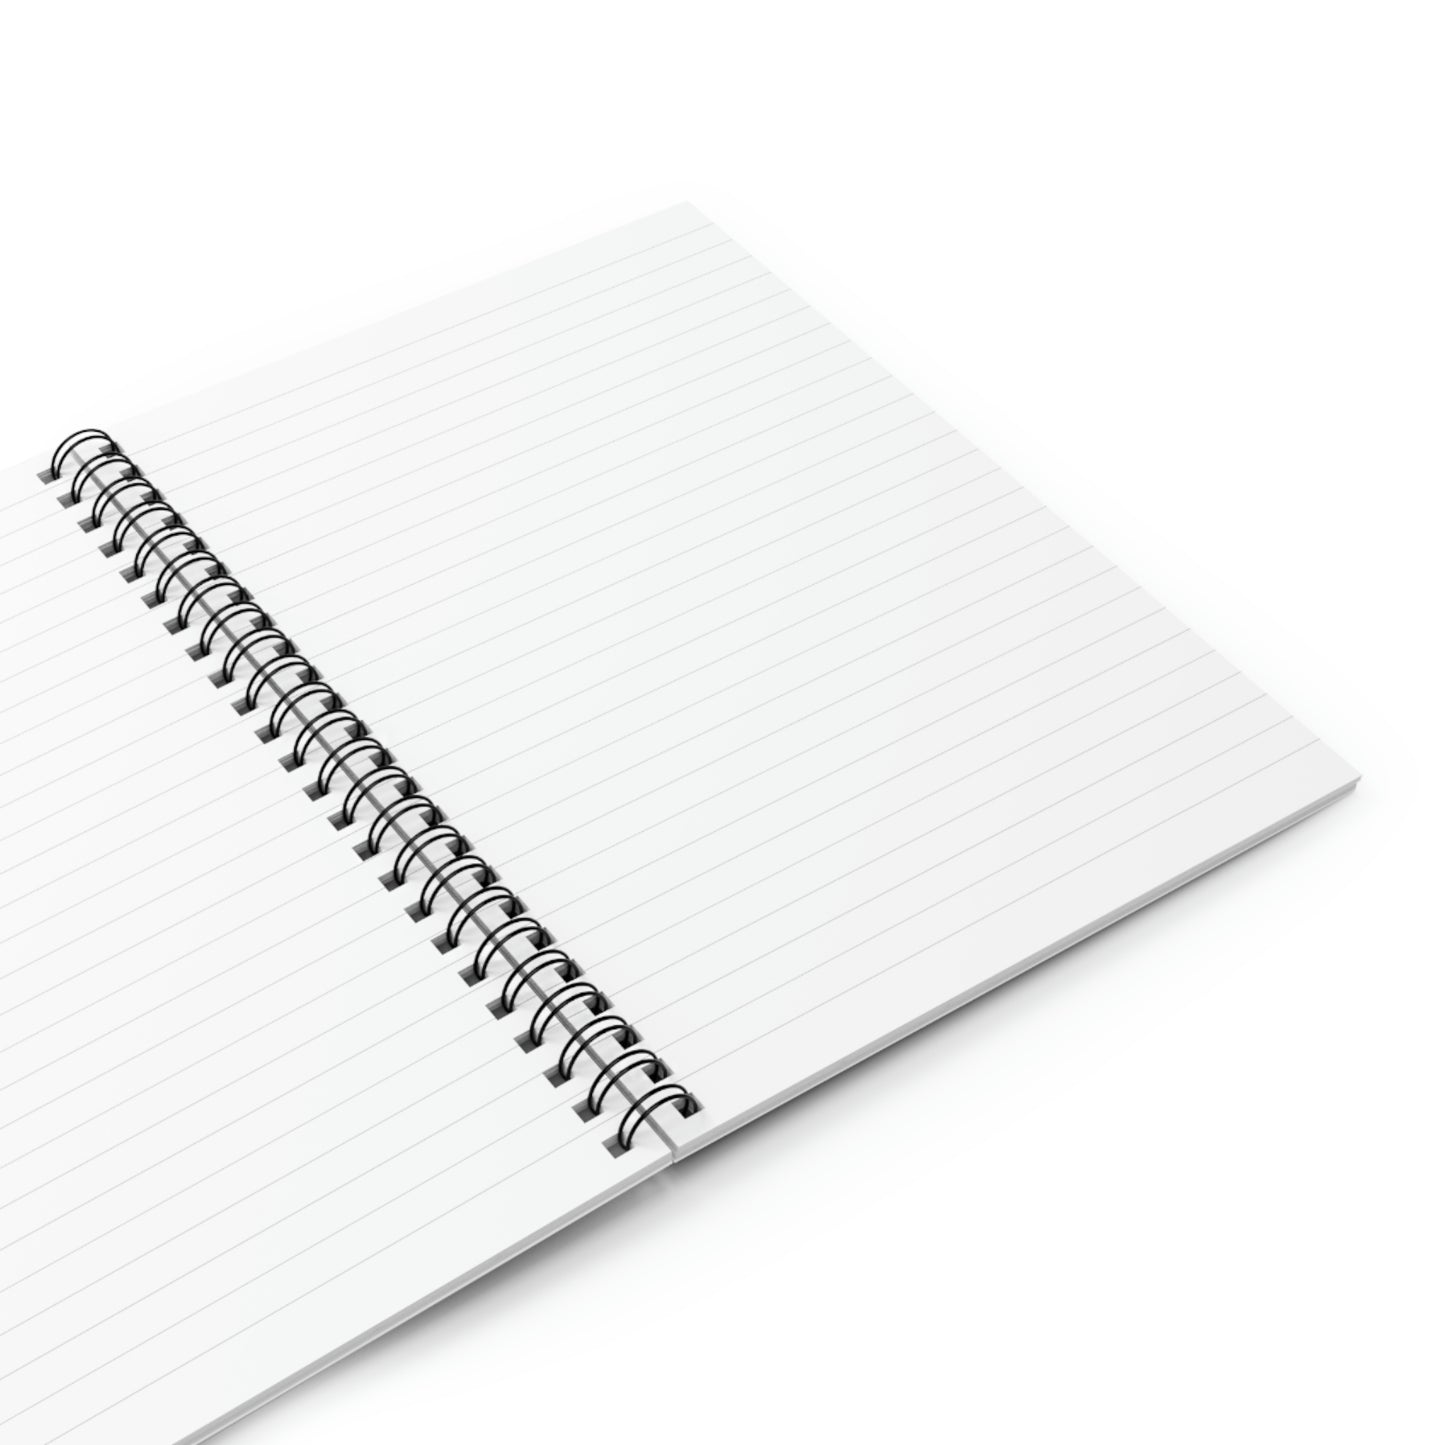 Purity Spiral Notebook - Ruled Line